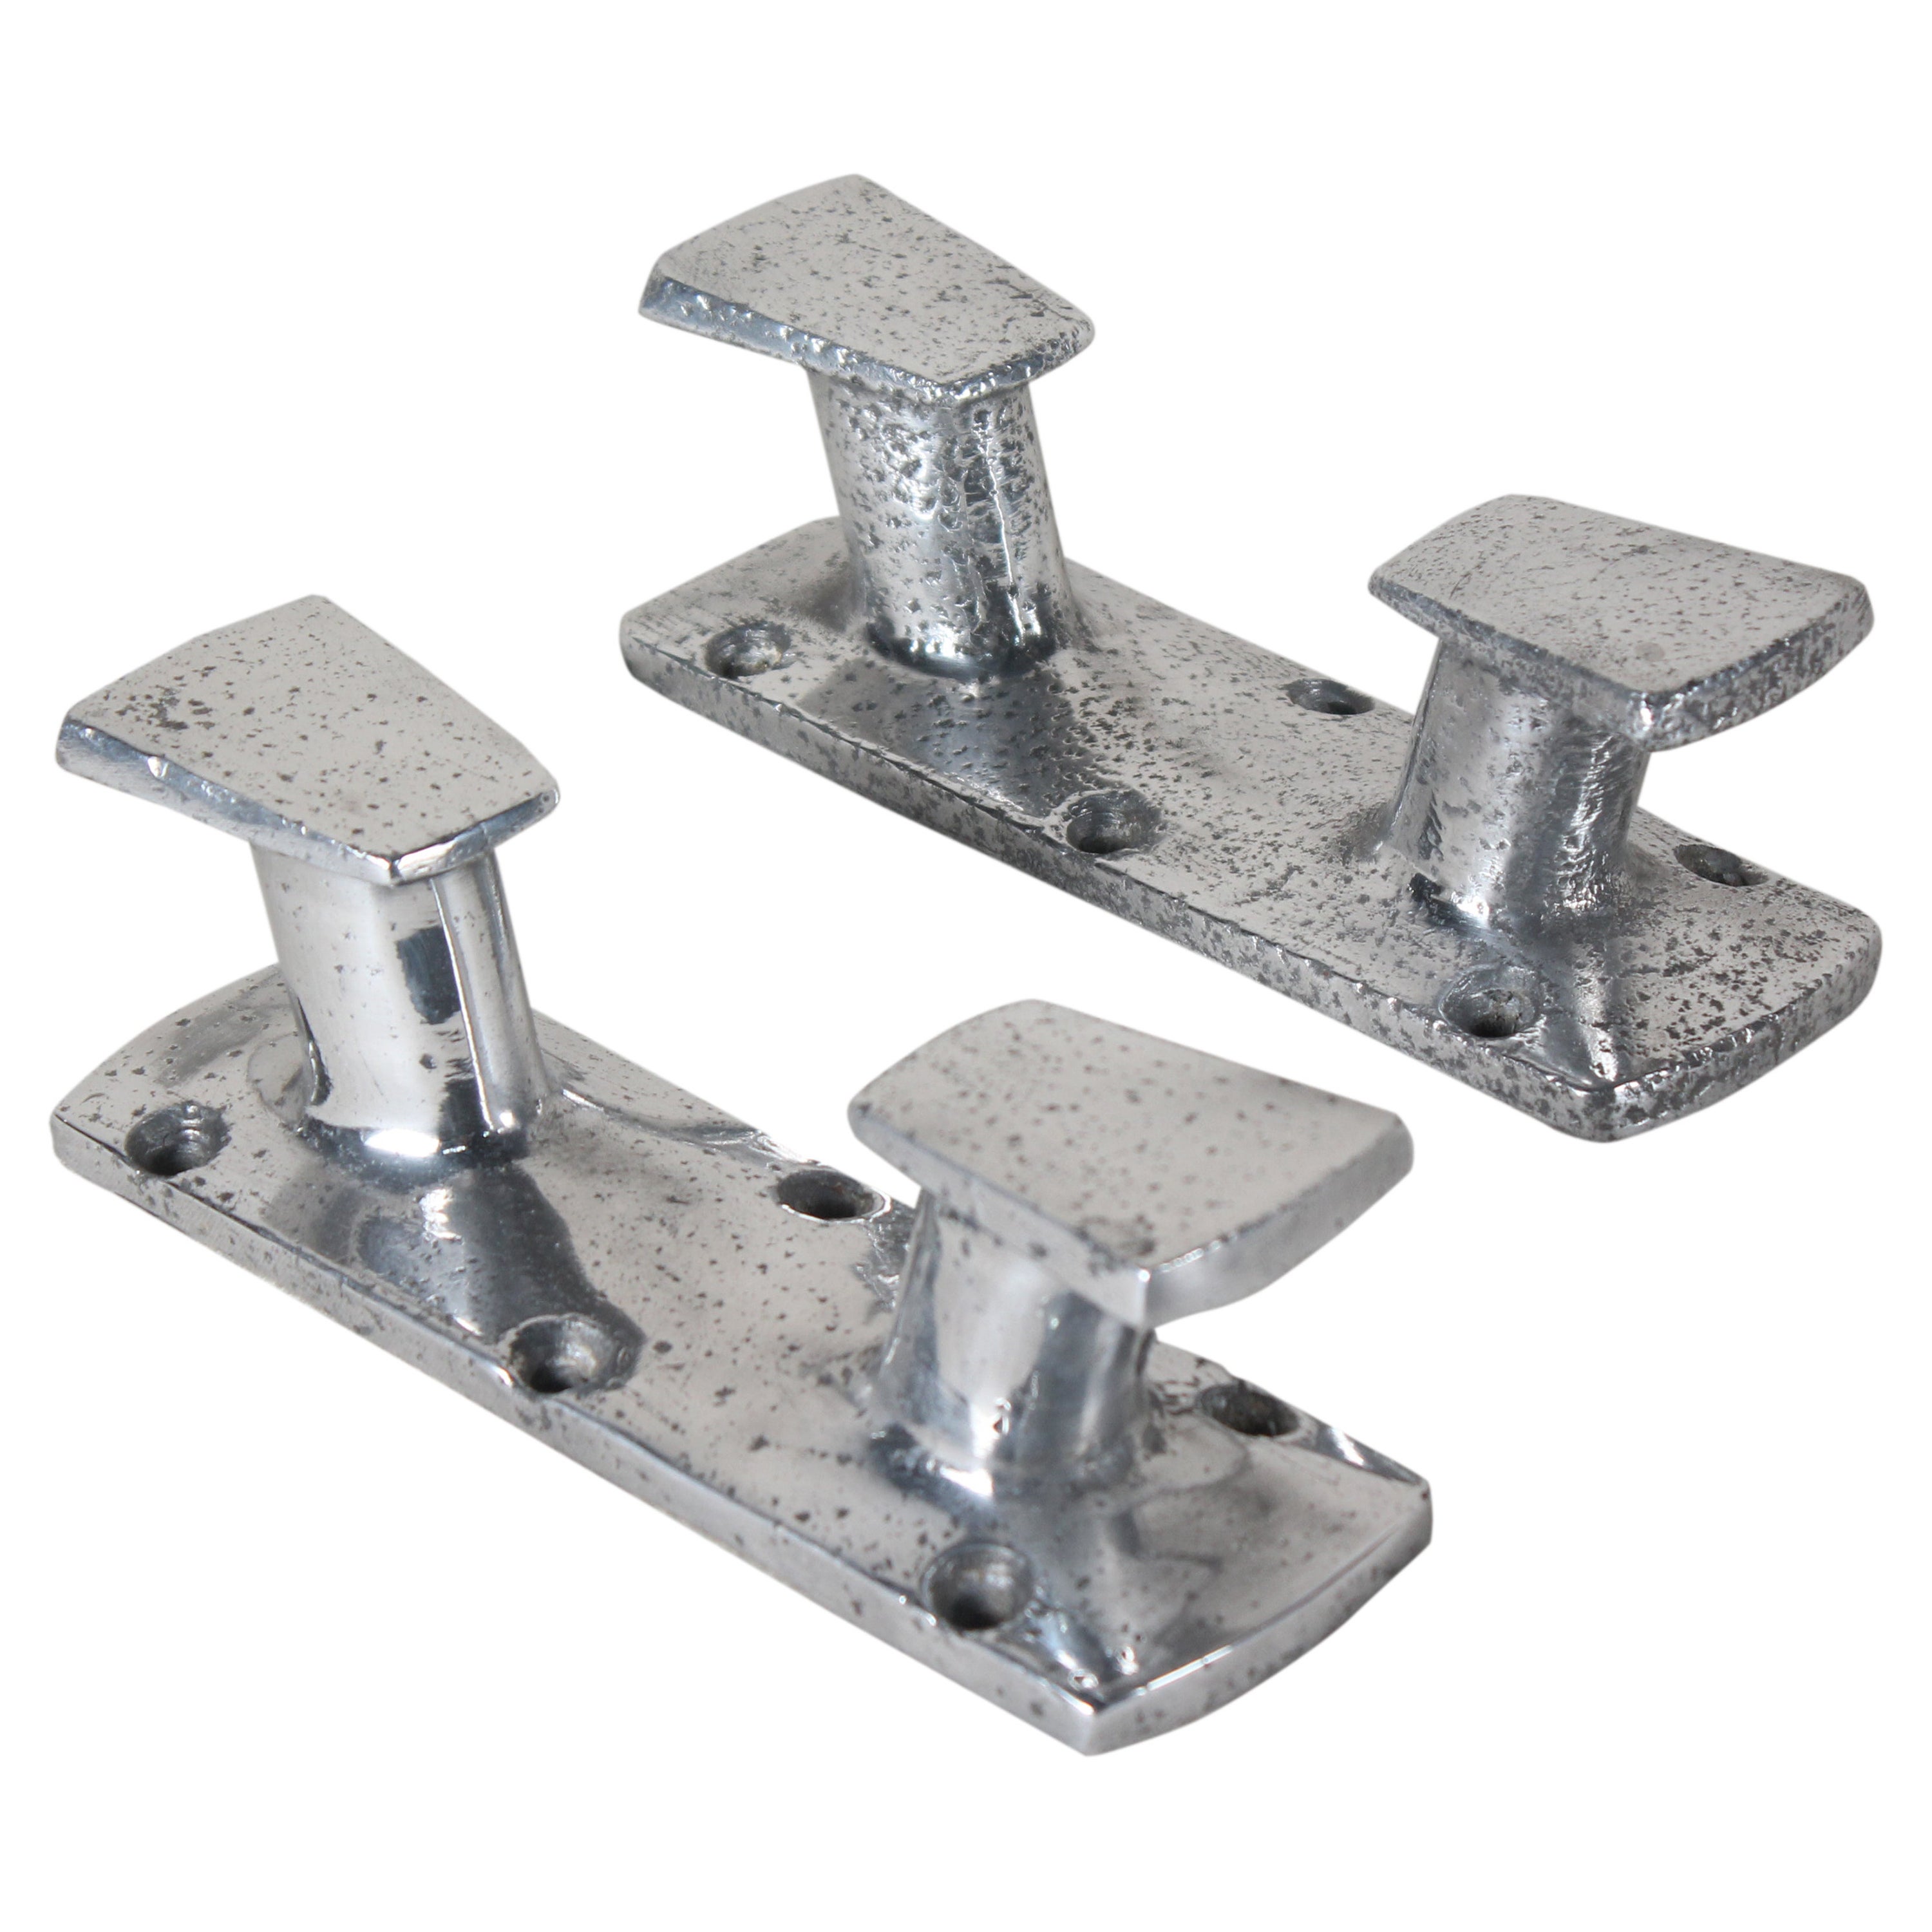 Pair of Large Stainless Steel Ship's Cleats, or Coat Hooks